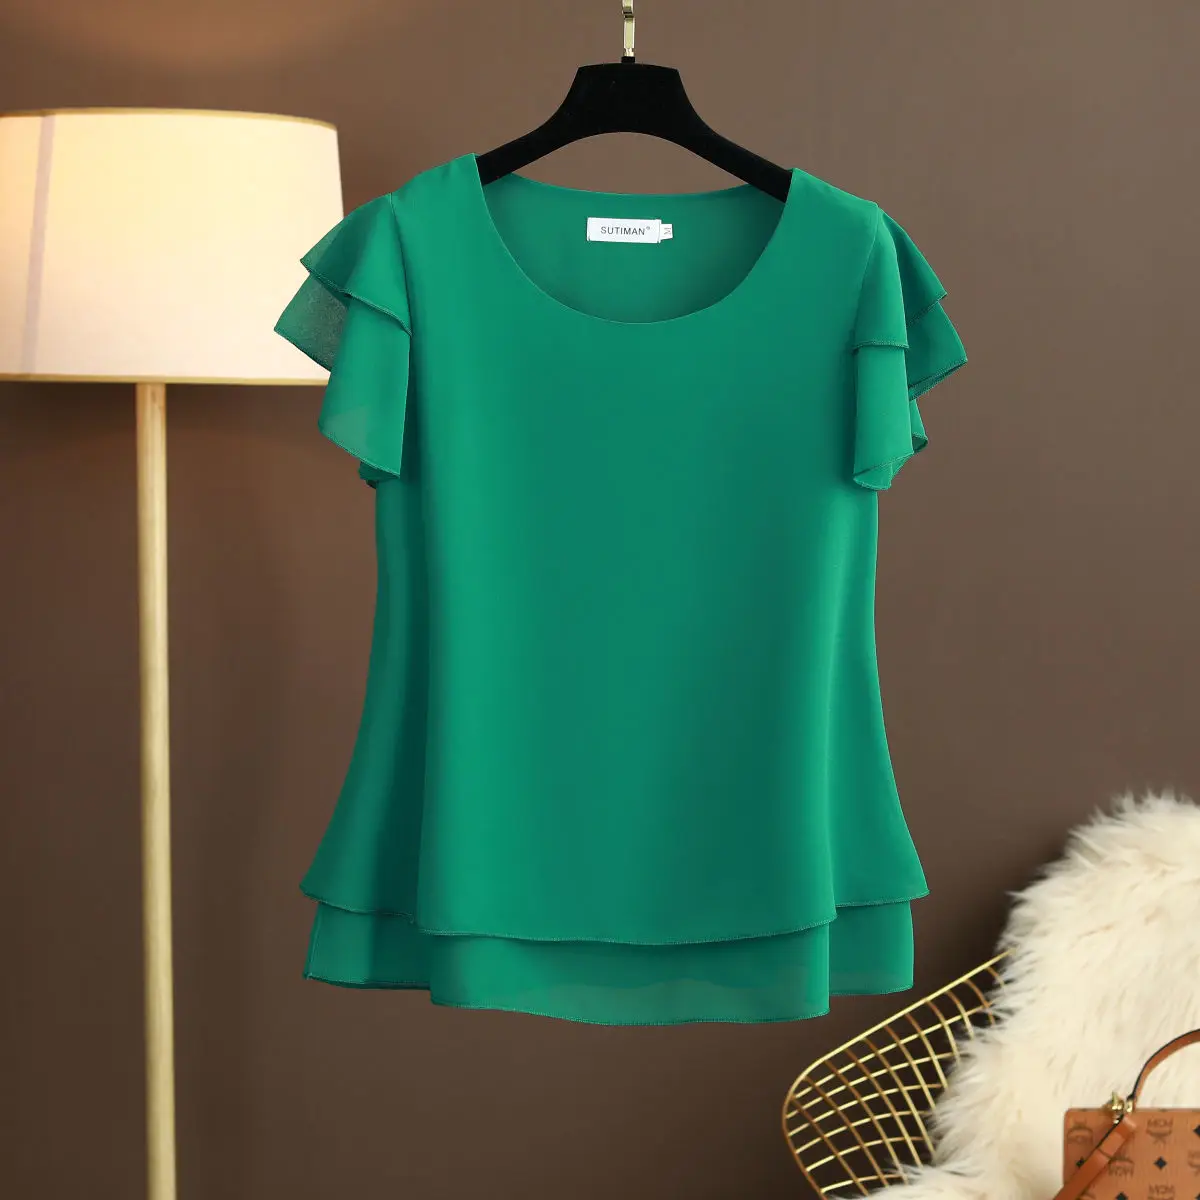 New Summer Women Blouse Loose O-Neck Chiffon Shirt Female Short Sleeve Blouse Plus Size 6XL Shirts womens tops and blouses Top